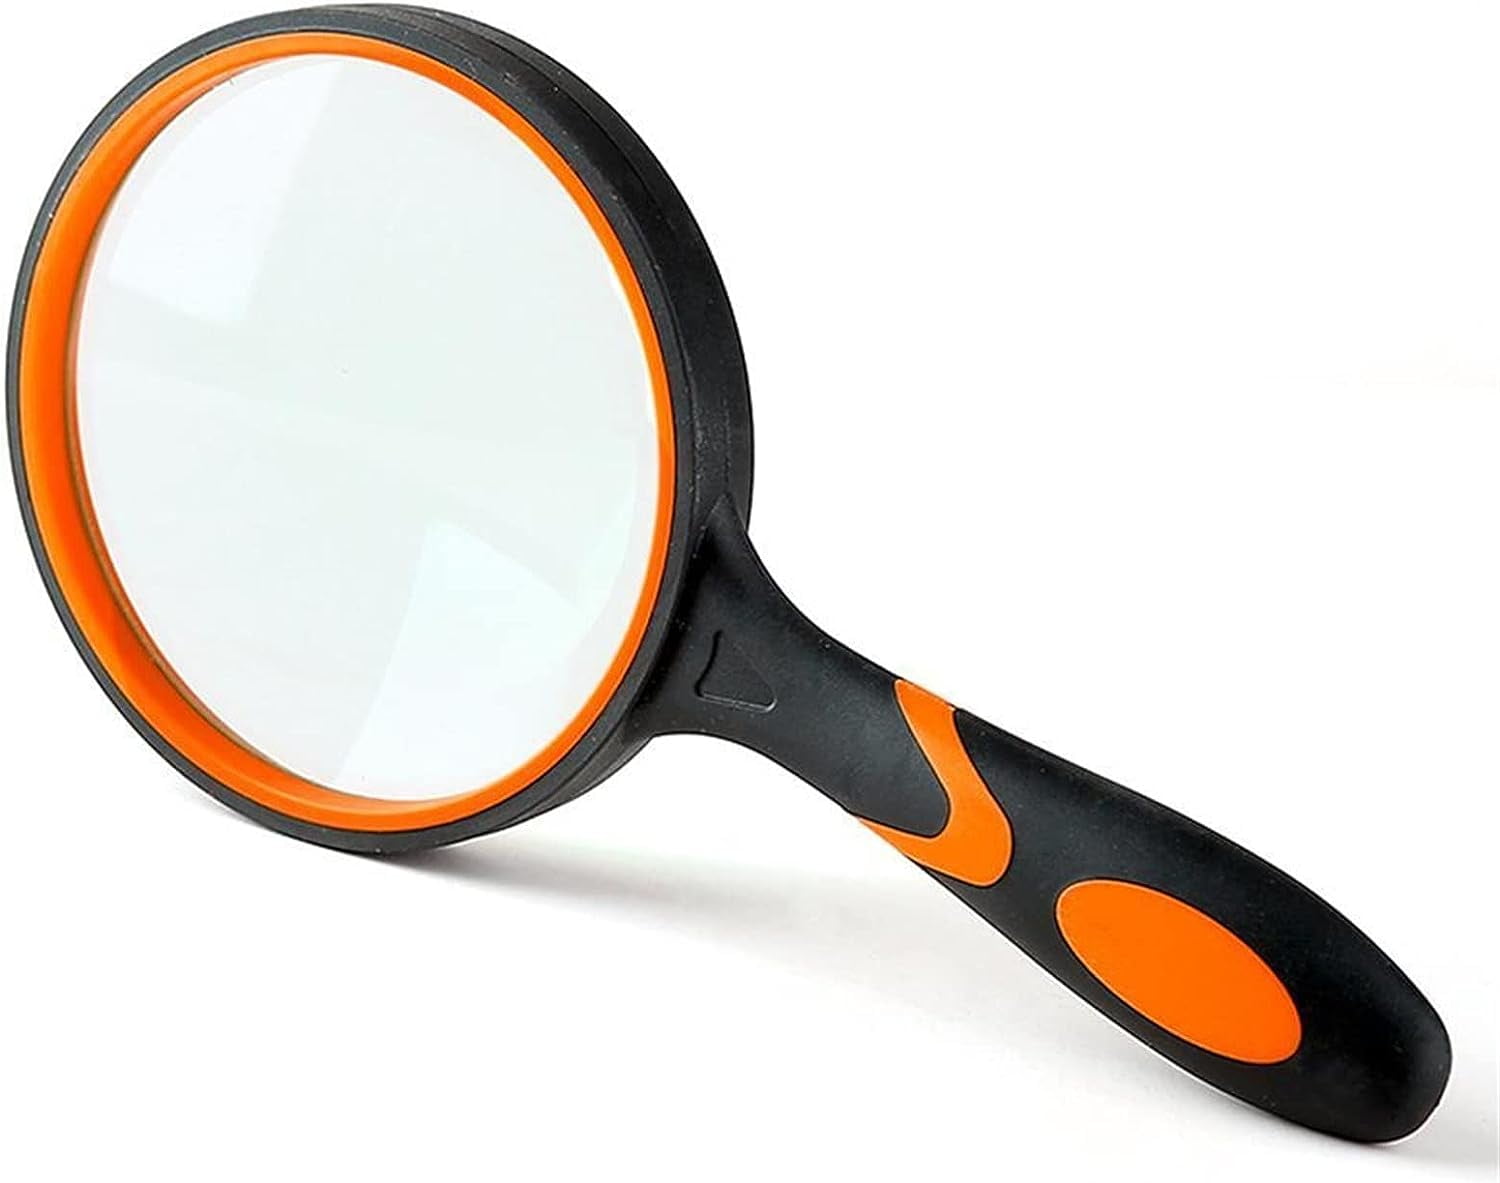 magnifying glasses,10X Magnifying Glass Rubber Handle High Handheld  Portable Glass Lens Magnifier for Jewelry Reading  Newspaper(Magnification:10X)